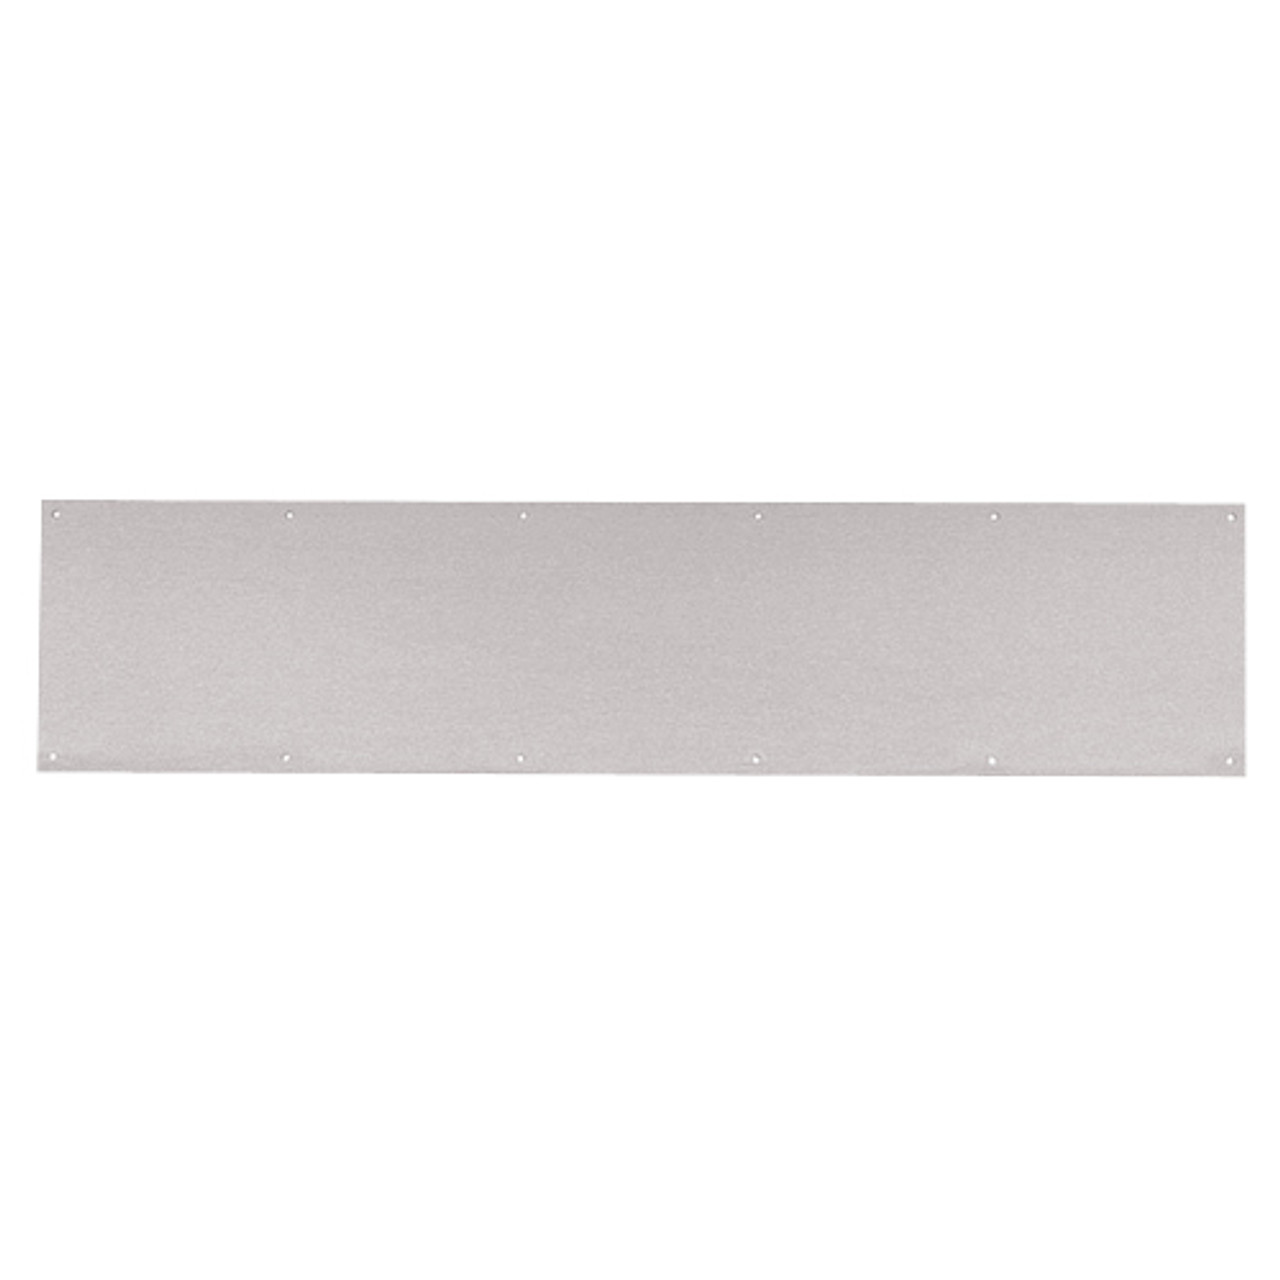 8400-US32D-18x22-B-CS Ives 8400 Series Protection Plate in Satin Stainless Steel